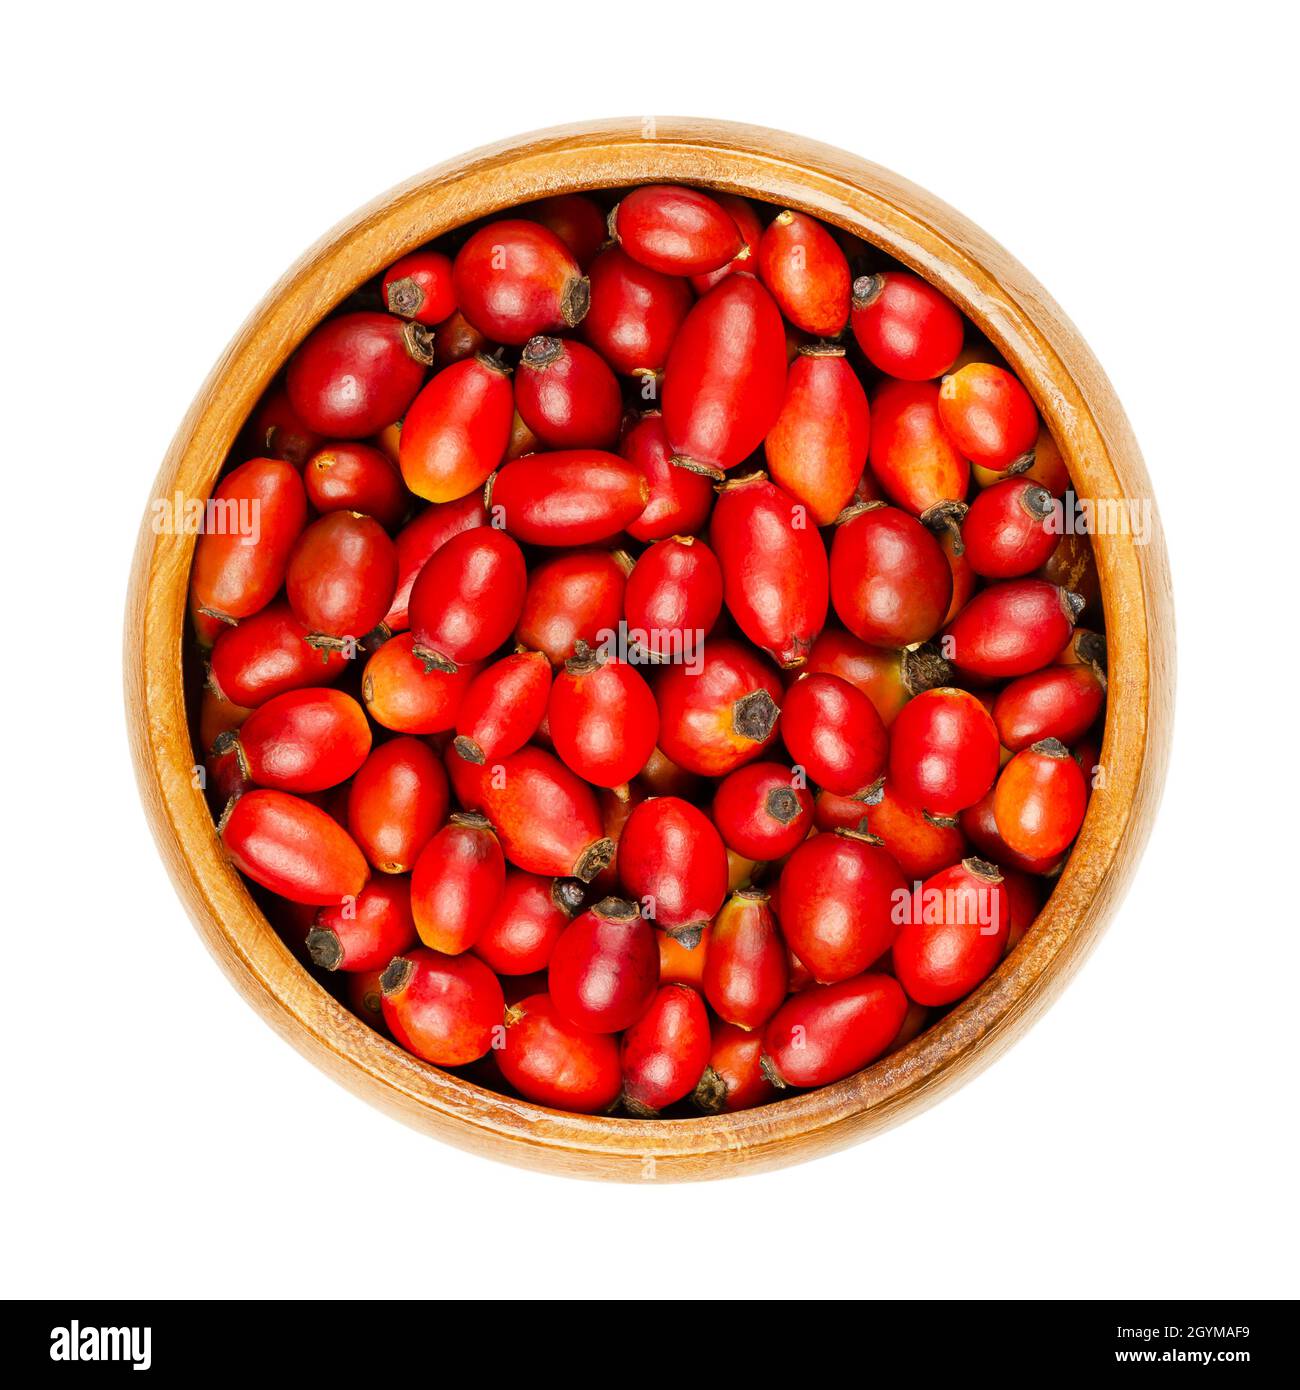 Fresh wild rose hips in a wooden bowl. Also rose haw or rose hep. Ripe and intense red fruits, used for herbal teas, jam and can be eaten raw. Stock Photo